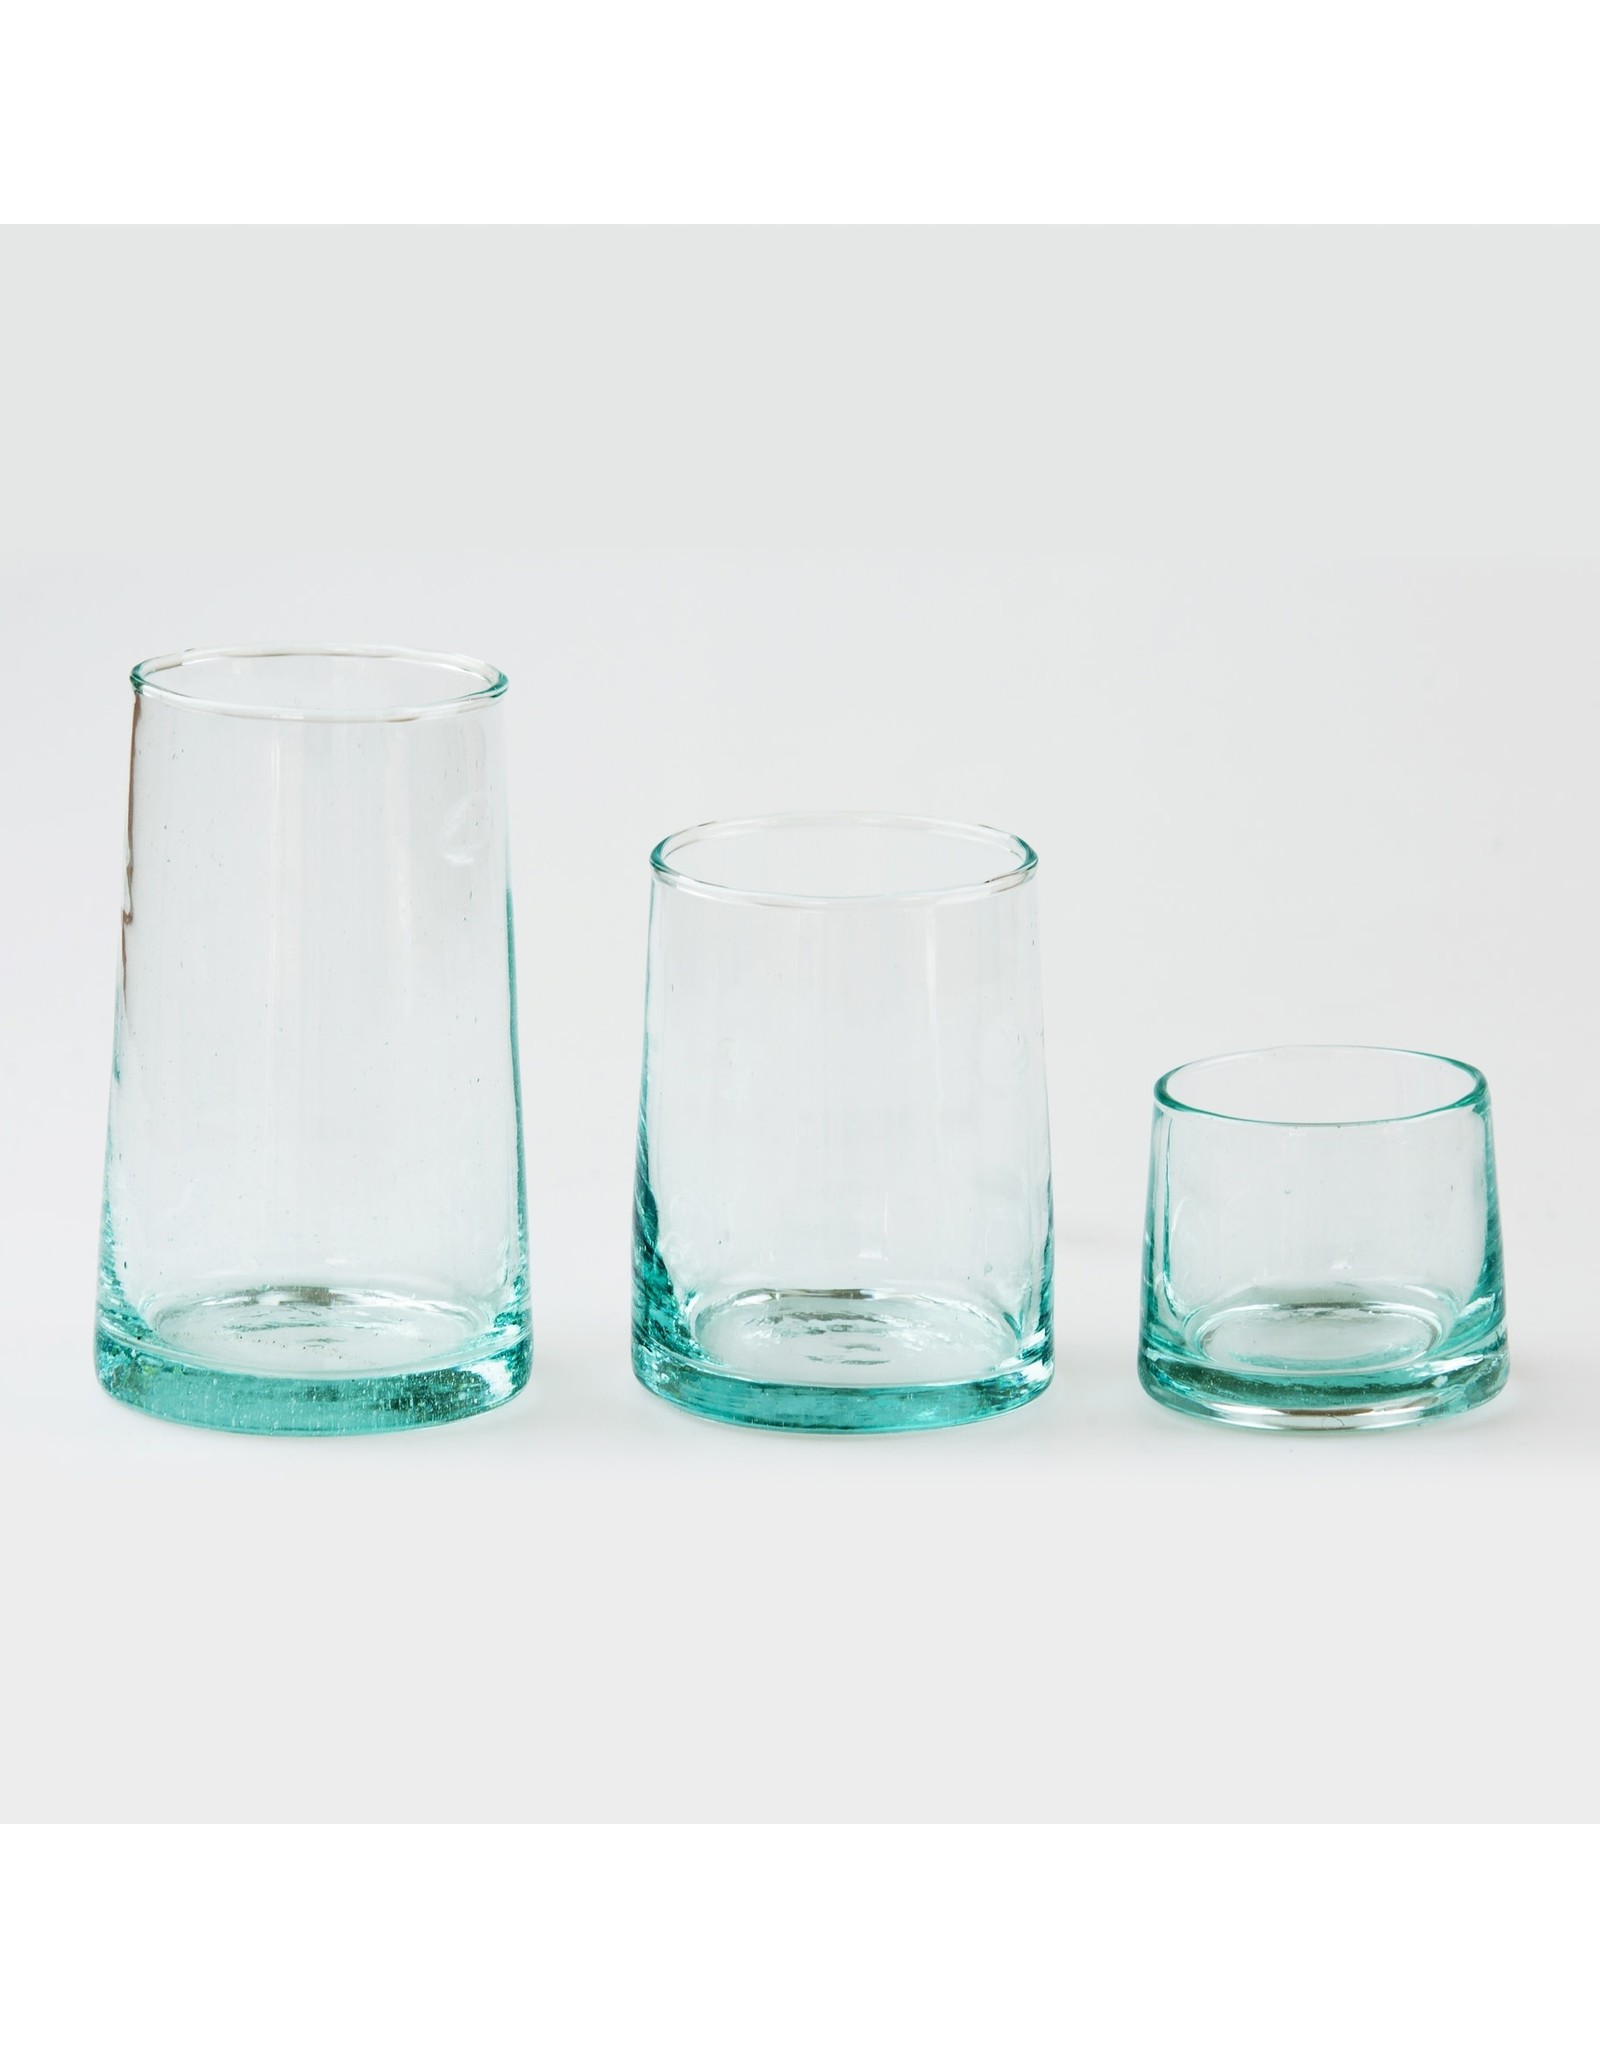 Socco Designs Handblown Recycled Glass Tumblers, Morocco